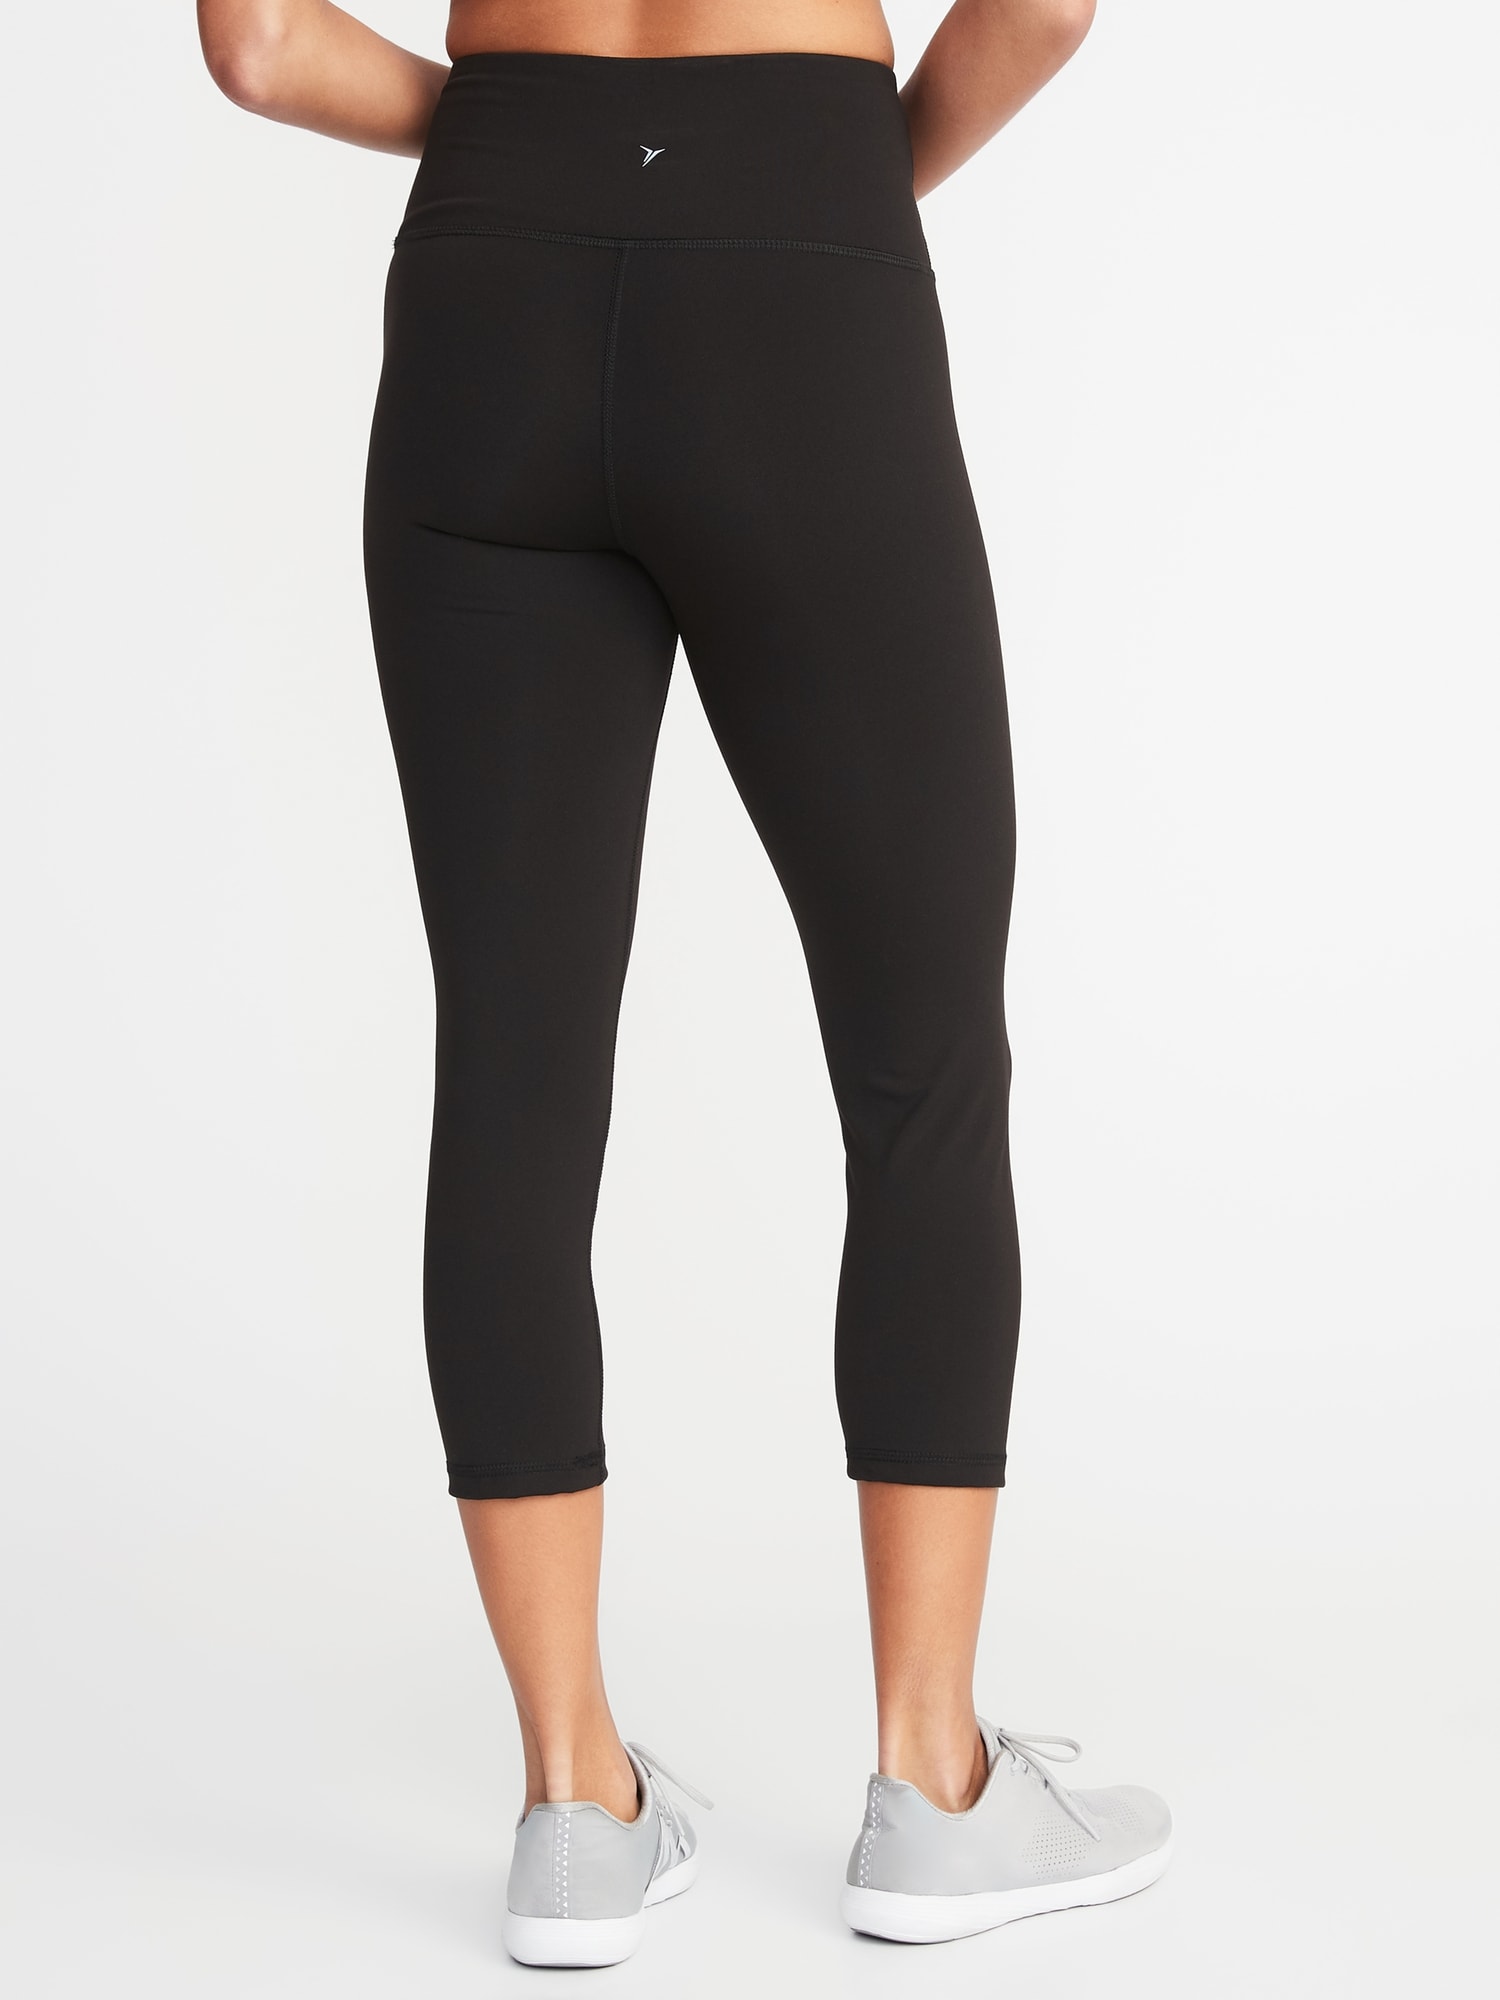 old navy workout pants with pockets